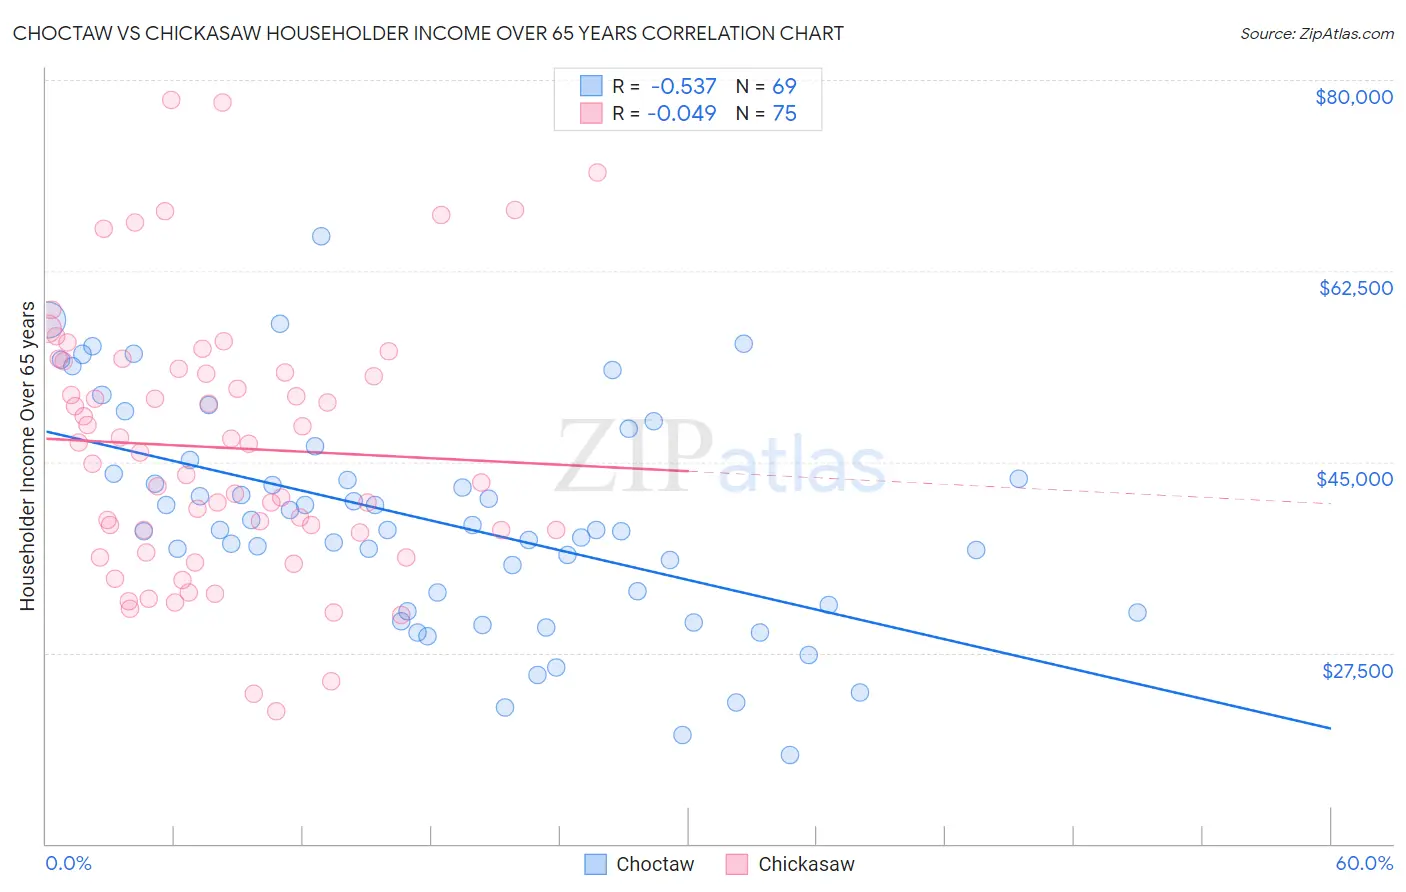 Choctaw vs Chickasaw Householder Income Over 65 years